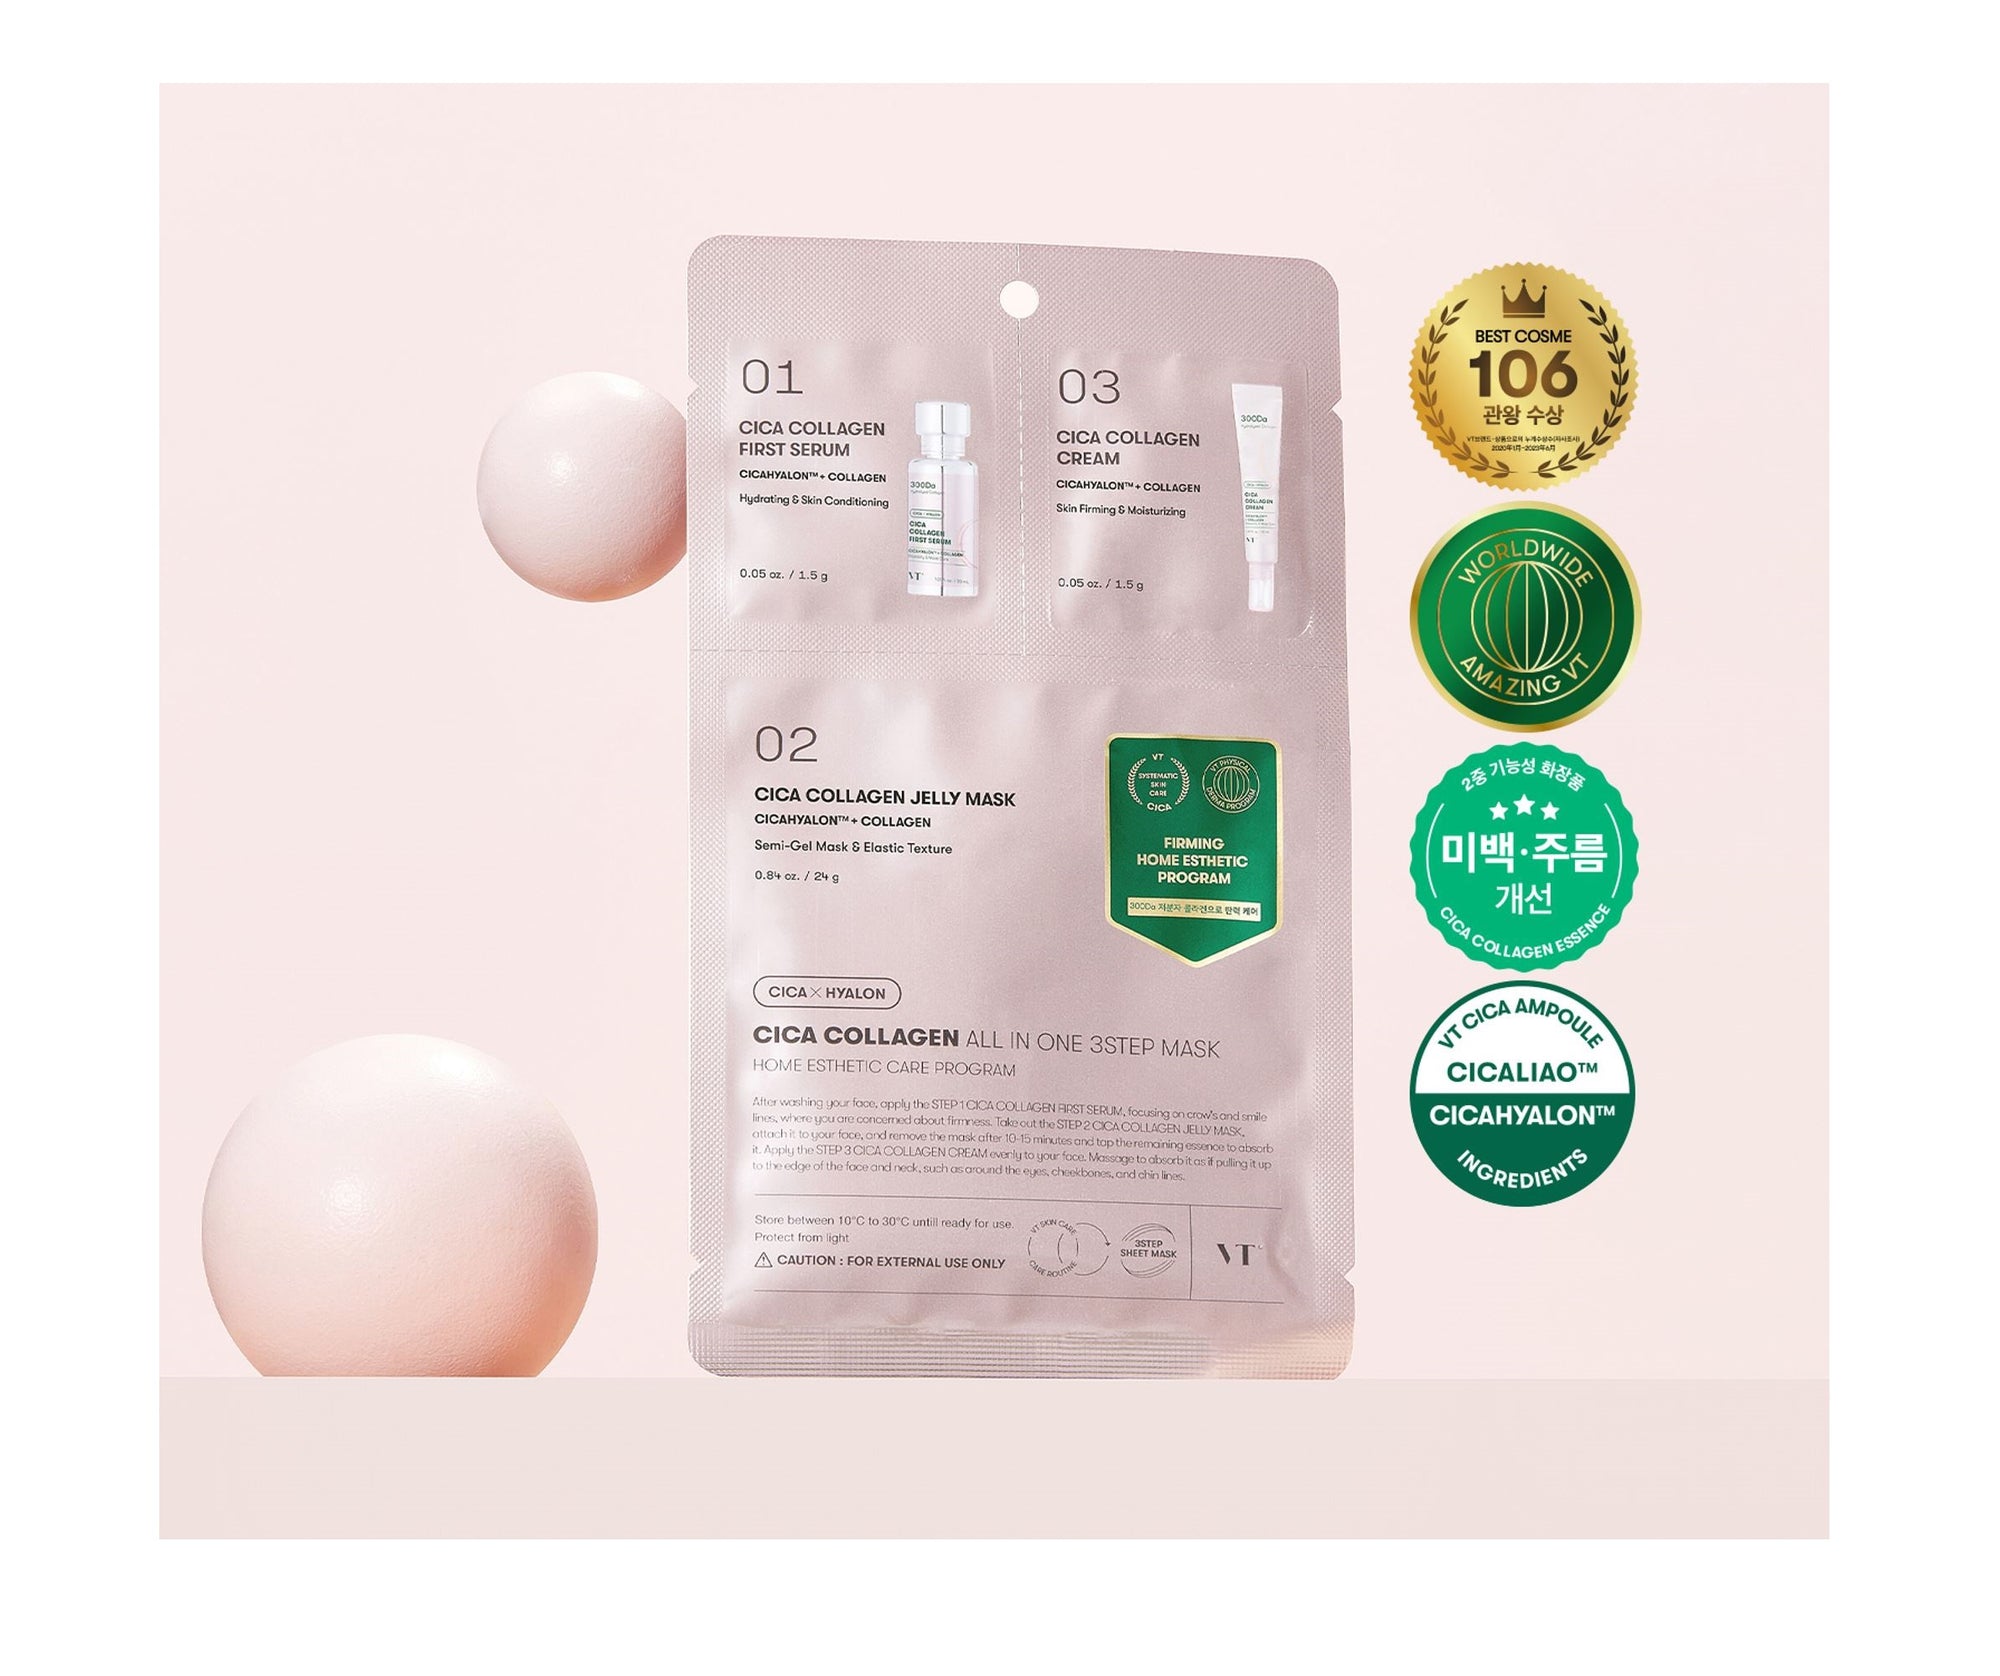 Cica Collagen All In One 3step Mask